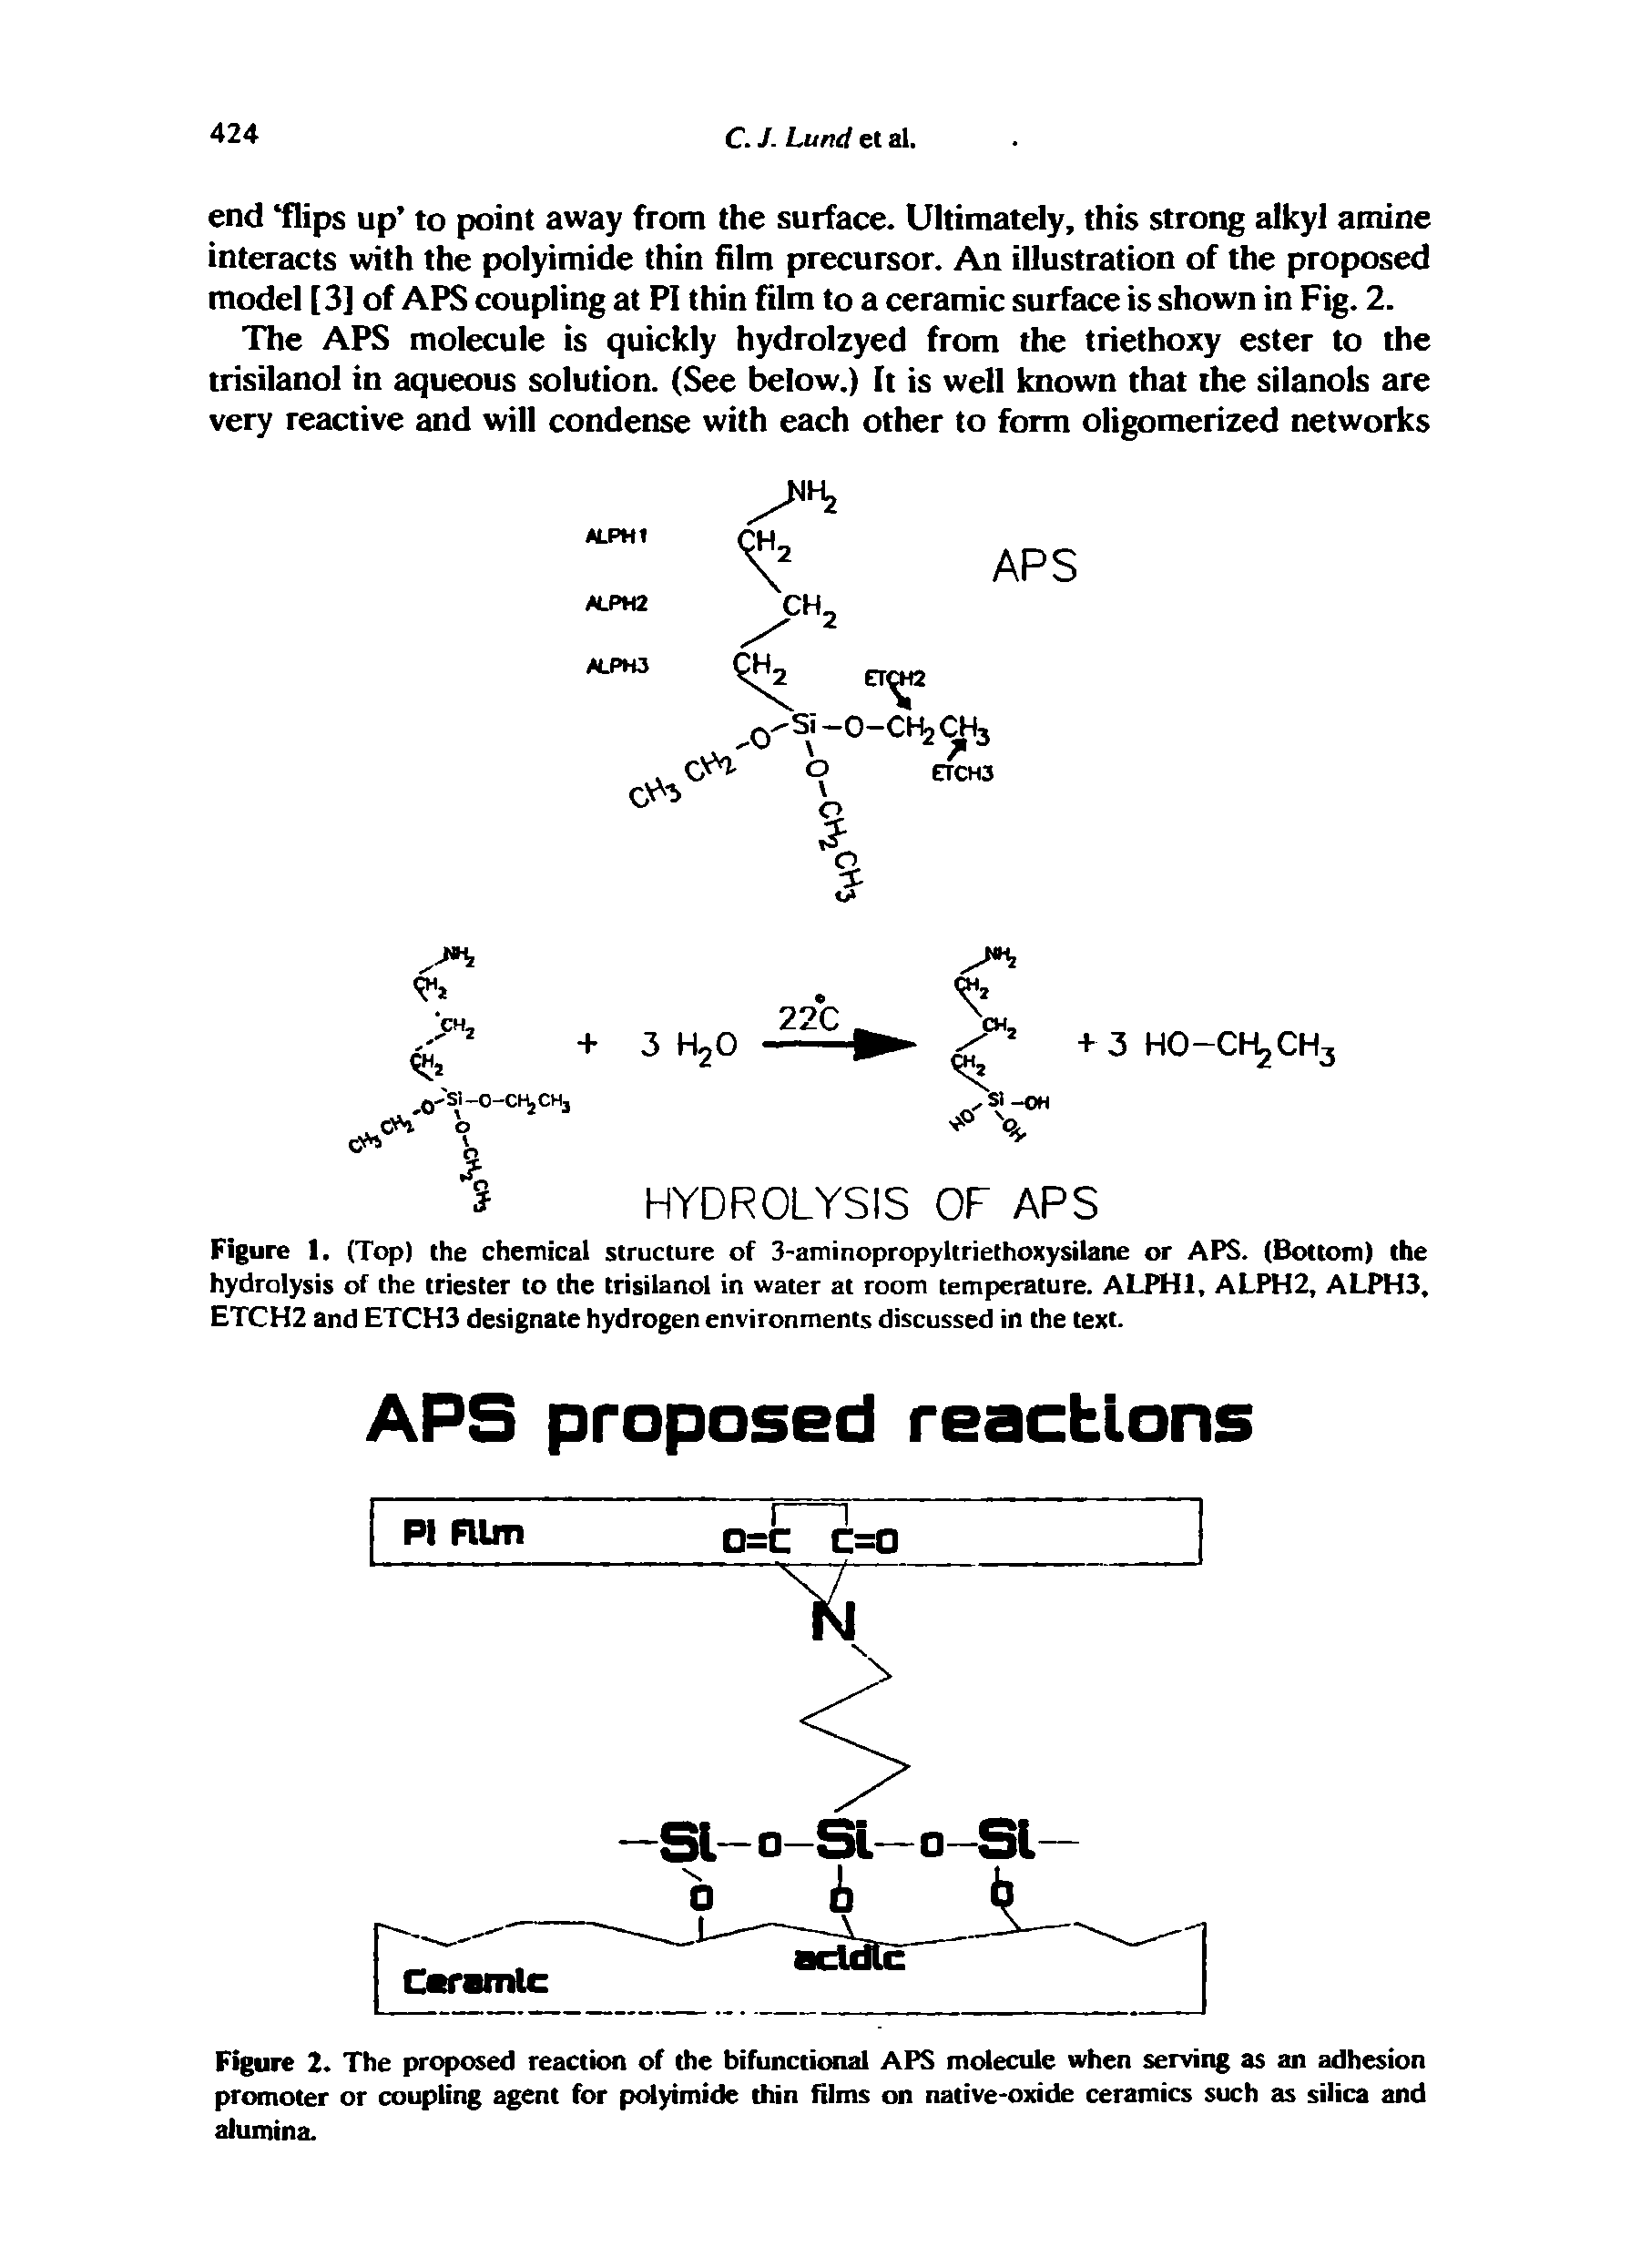 Figure 2. The proposed reaction of the bifunctional APS molecule when serving as an adhesion promoter or coupling agent for polyimide thin films on native-oxide ceramics such as silica and alumina.